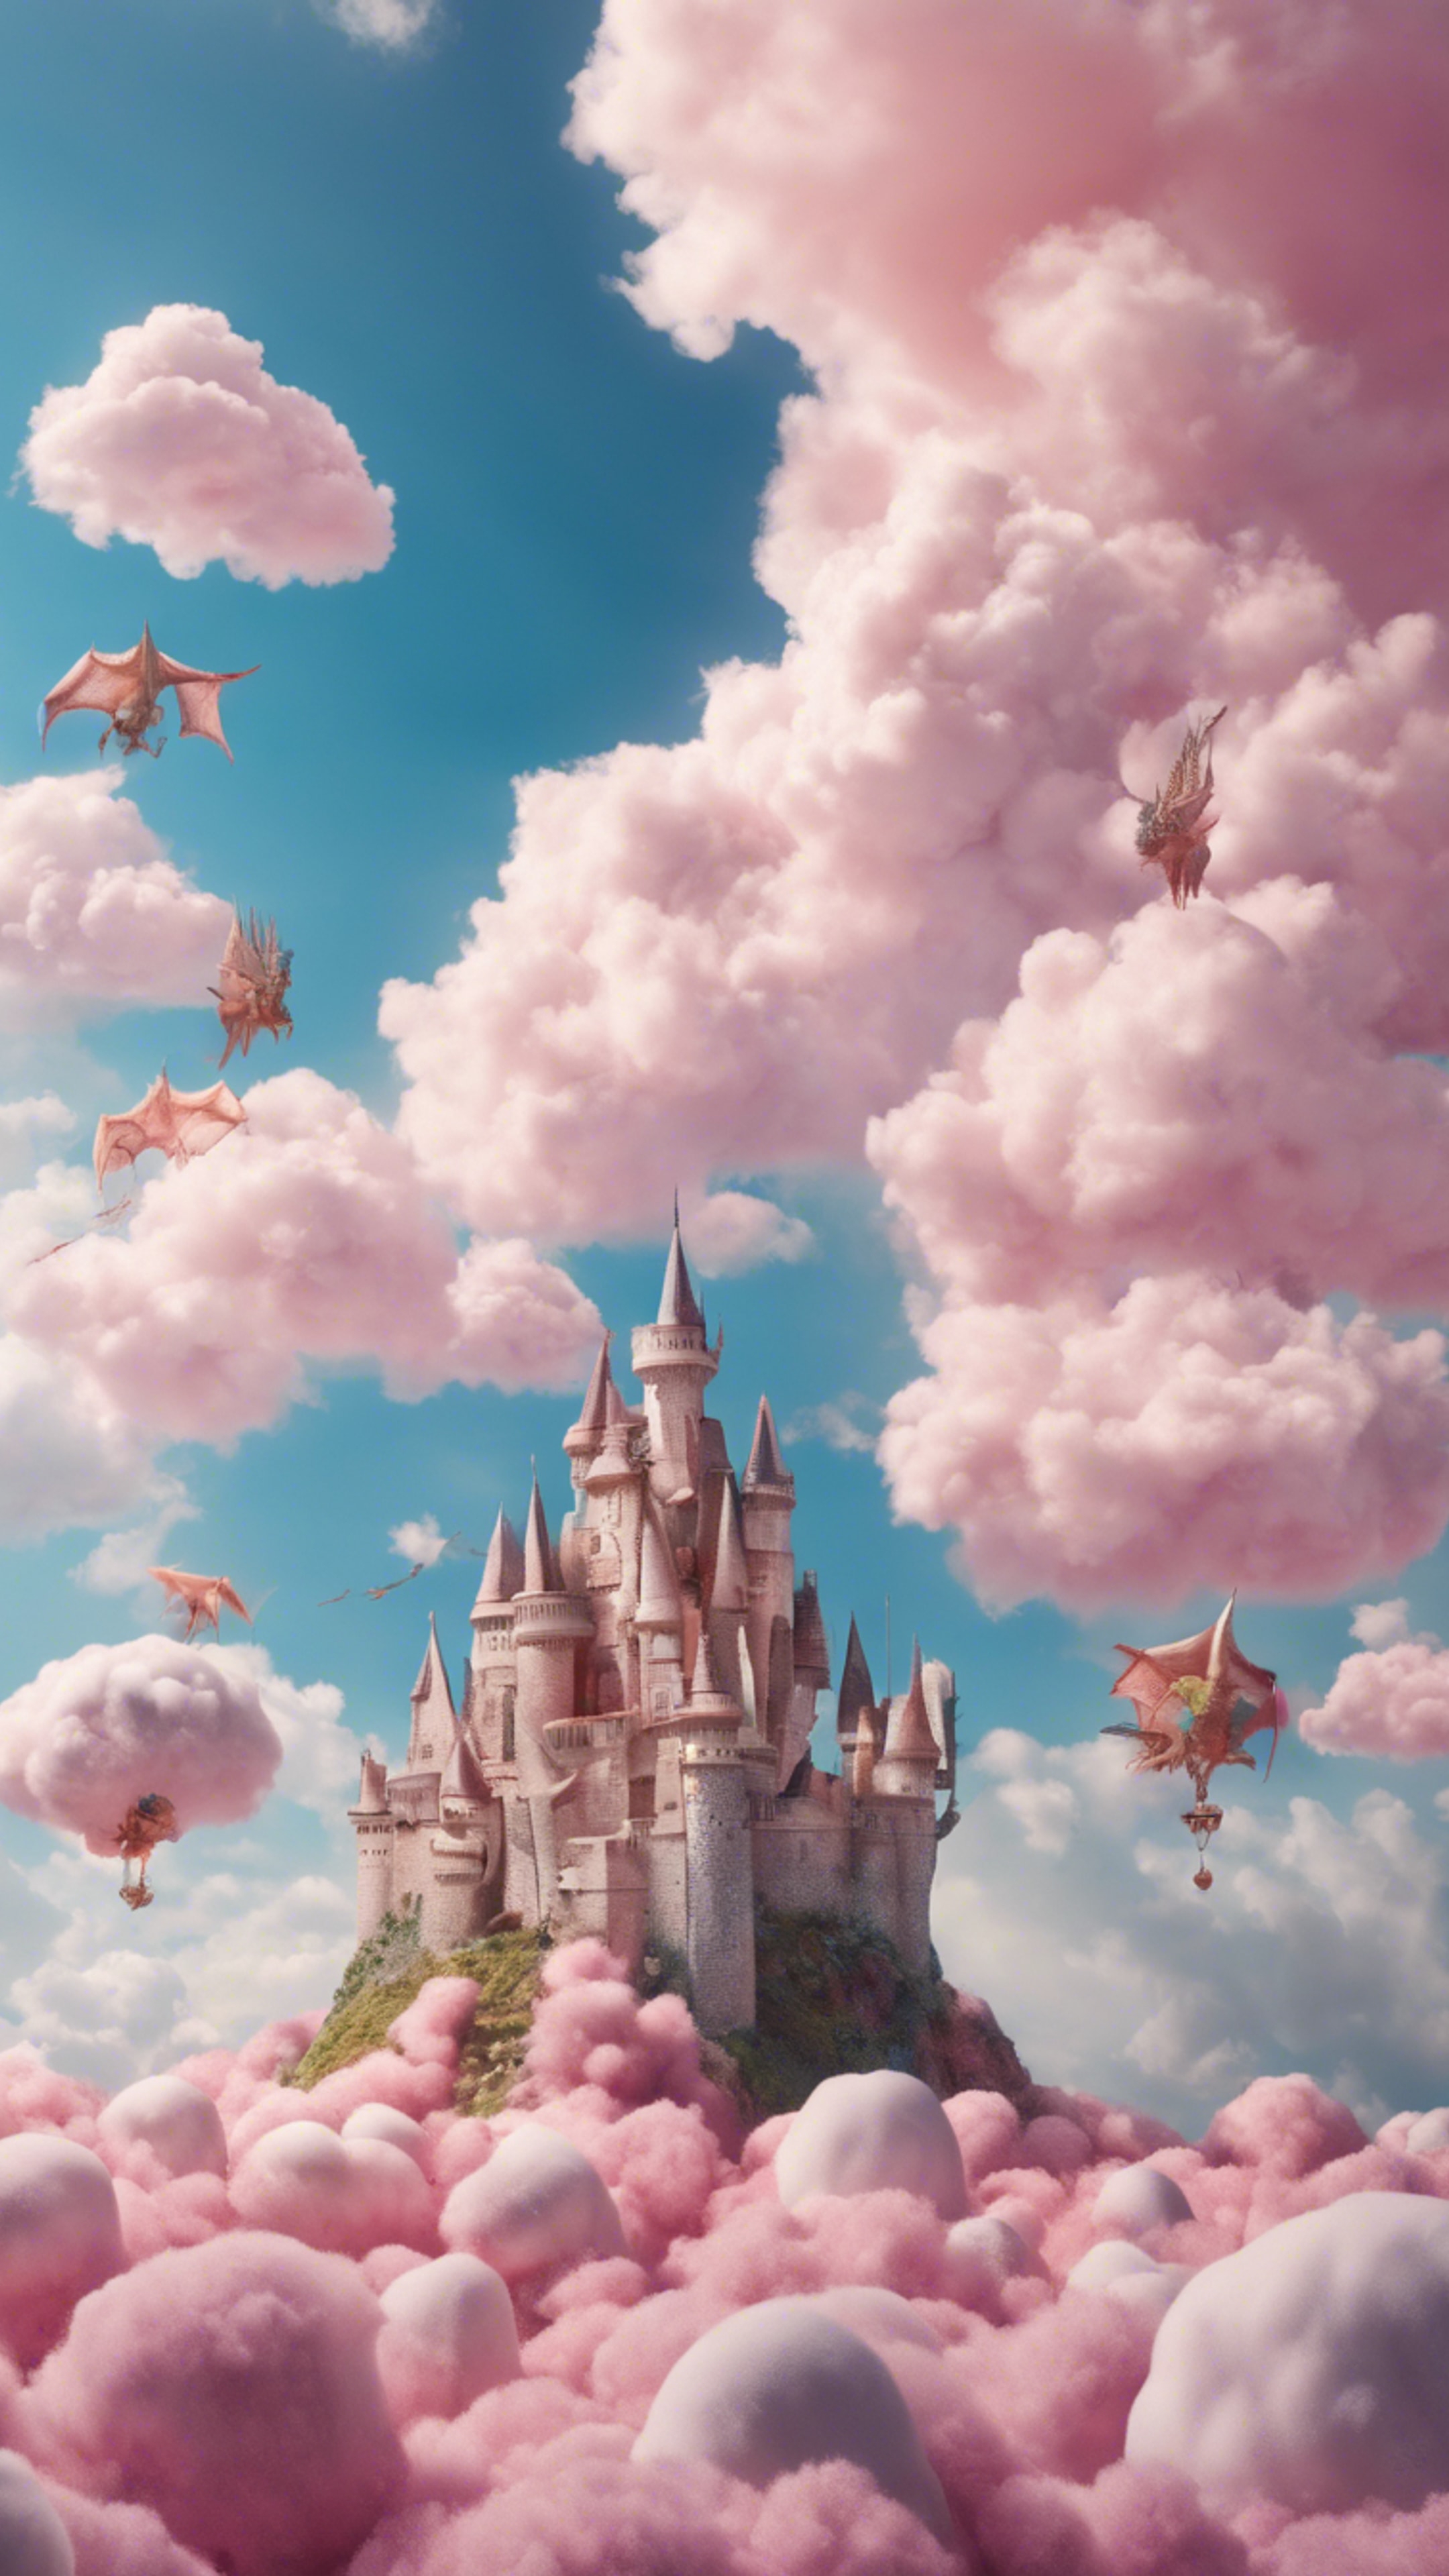 A castle floating in the sky above fluffy, cotton-candy-like clouds surrounded by a huddle of playful, magical dragons.壁紙[be63bba74c3941c98c10]